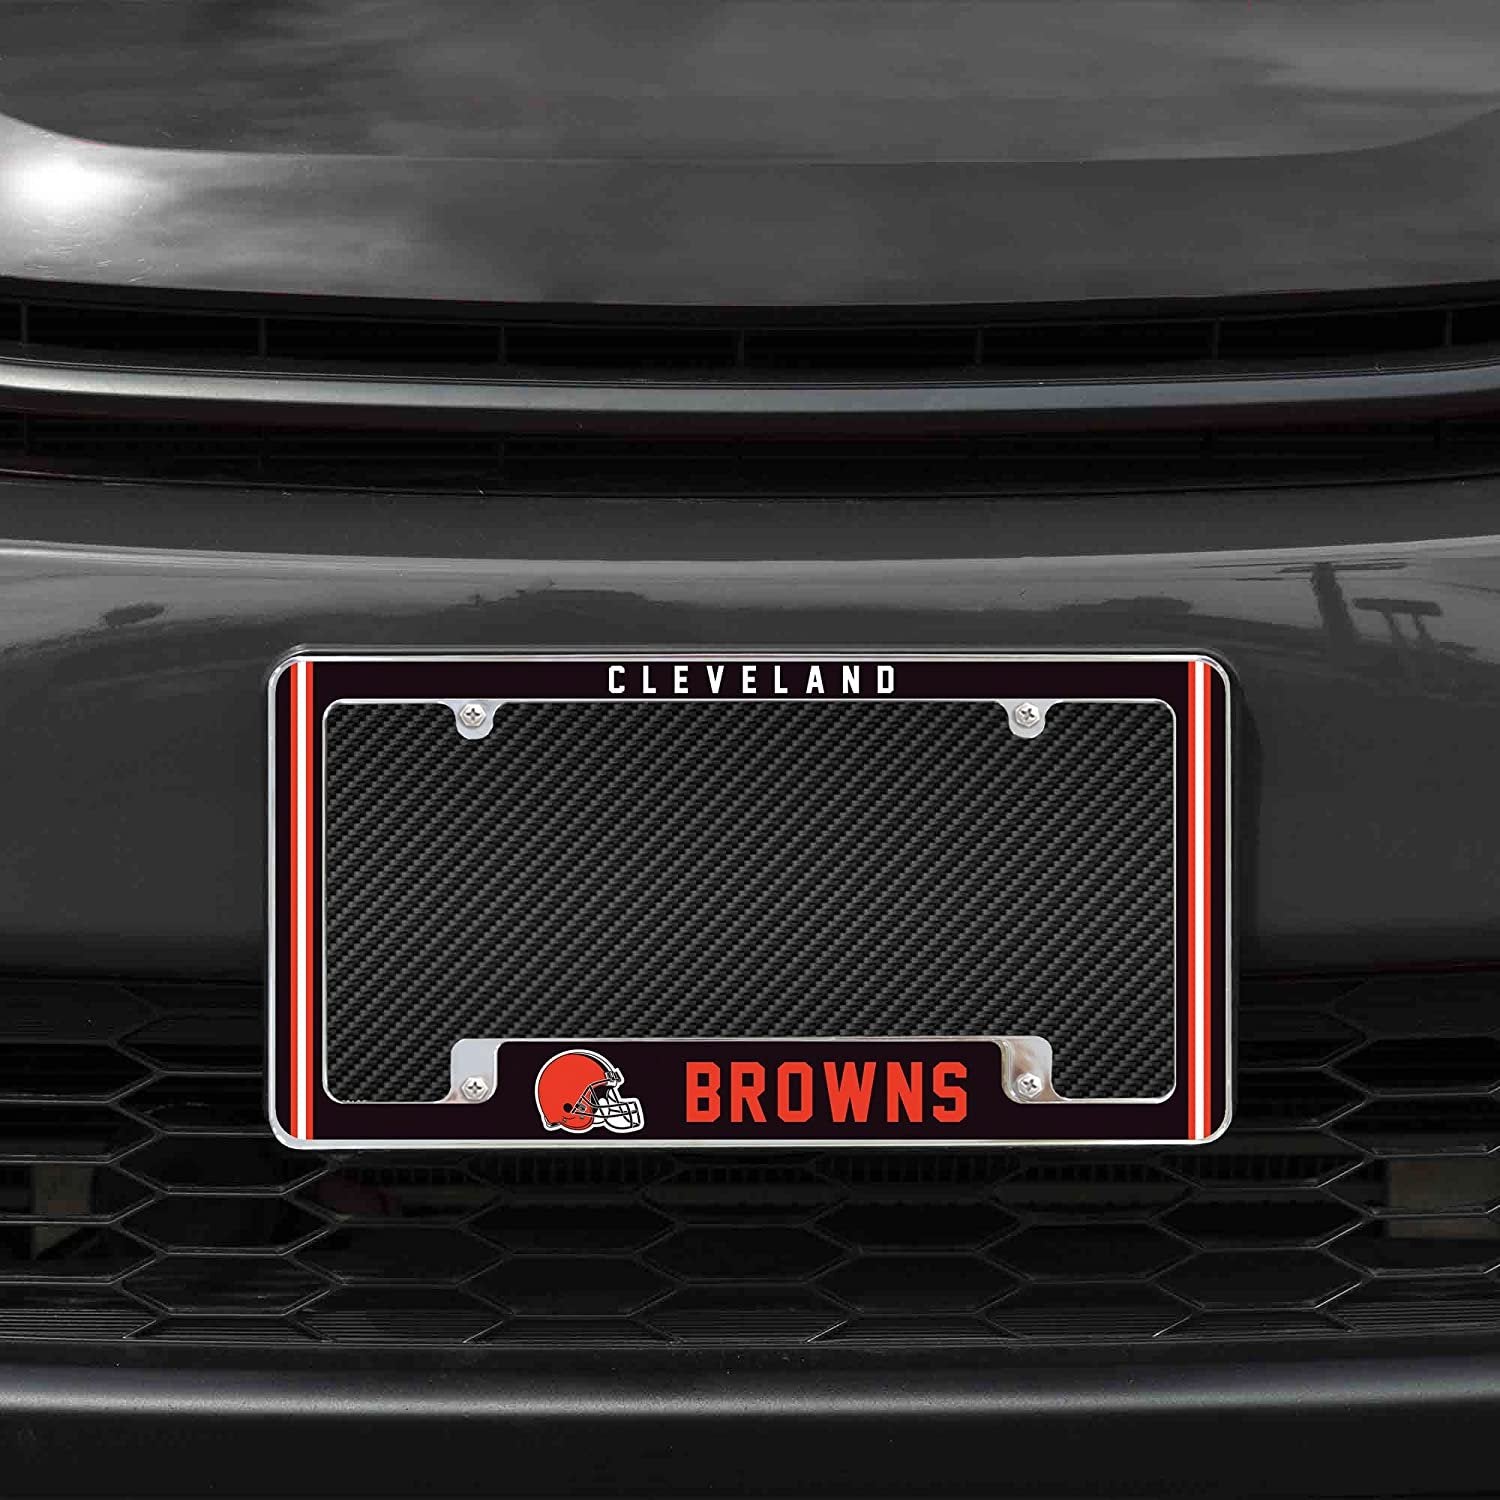 Cleveland Browns Metal License Plate Frame Chrome Tag Cover Alternate Design 6x12 Inch